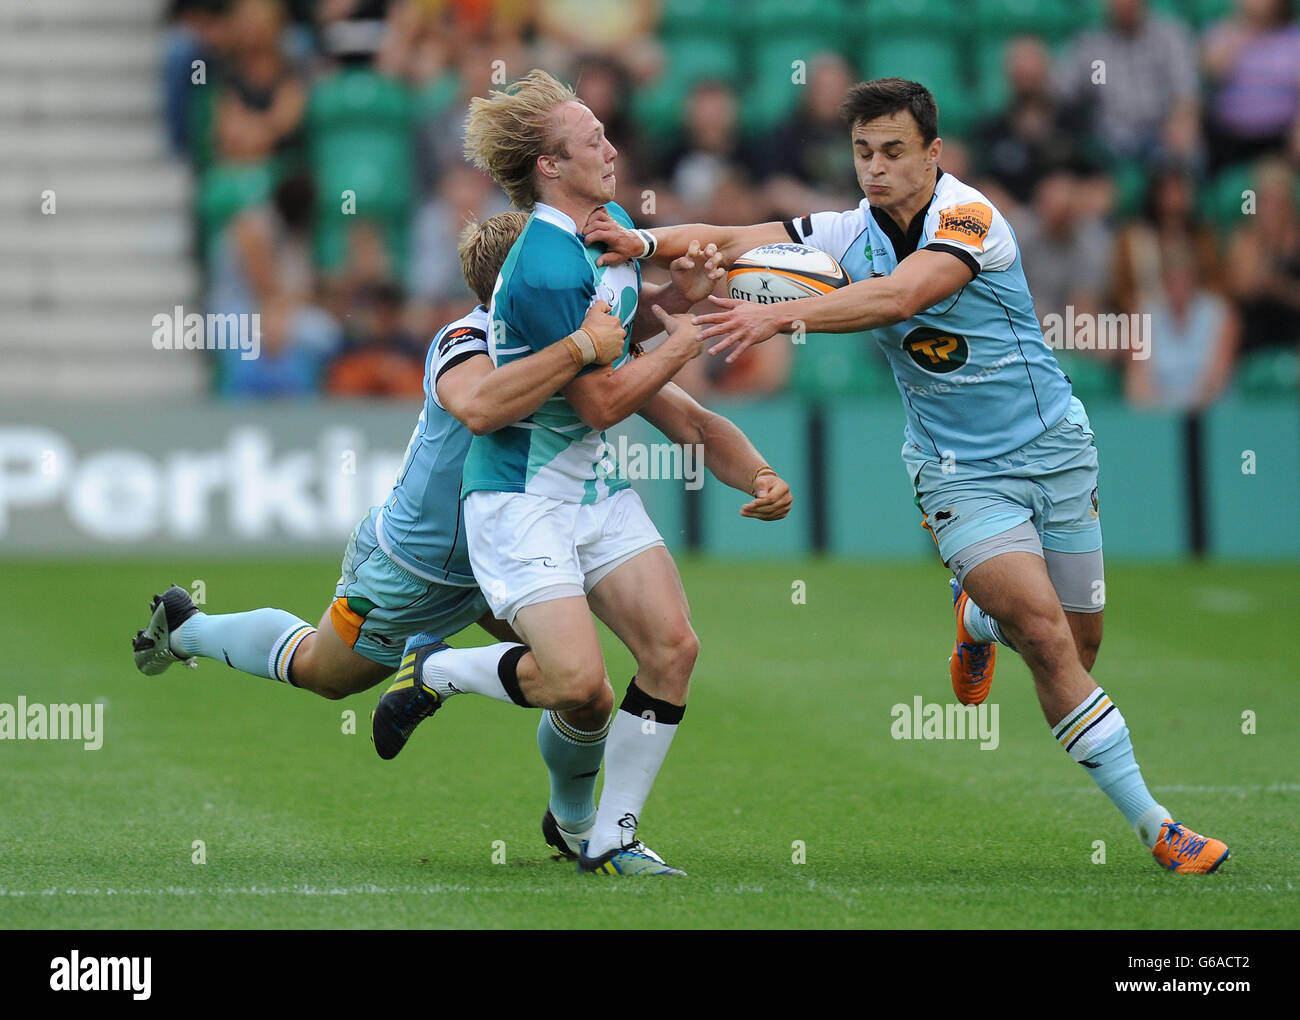 Newcastle Falcons 7's Joel Hodgson (centre) is tackled by Northampton Saints 7's Tom Stephenson (left) and Tom Collins (right) during the Group B match of the J.P. Morgan Asset Management Premiership Rugby 7's at Franklin's Gardens, Northampton. Stock Photo